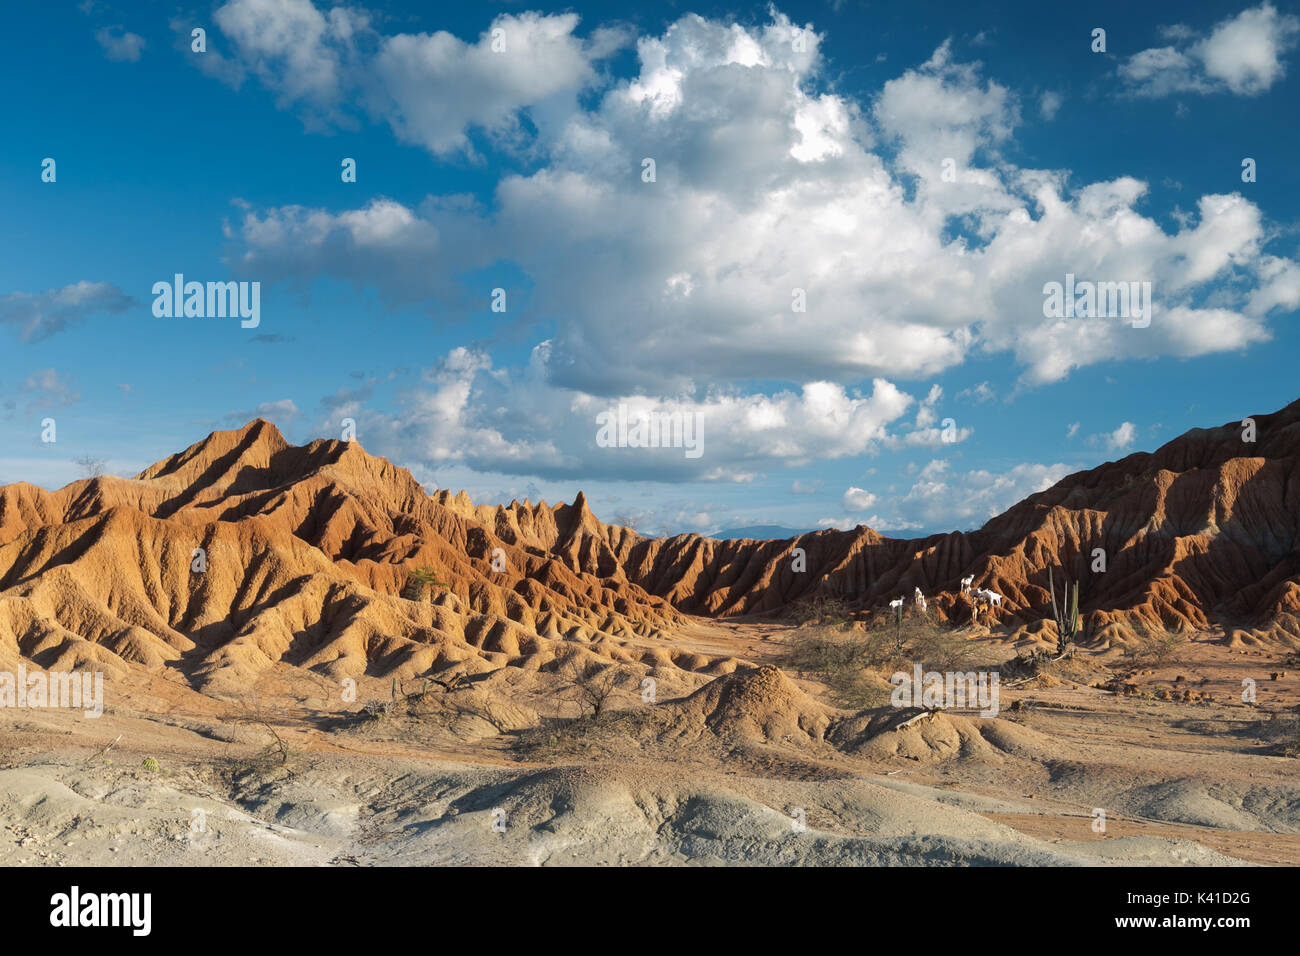 big cactuses in red desert, tatacoa desert, colombia, latin america, clouds and sand, red sand in desert Stock Photo